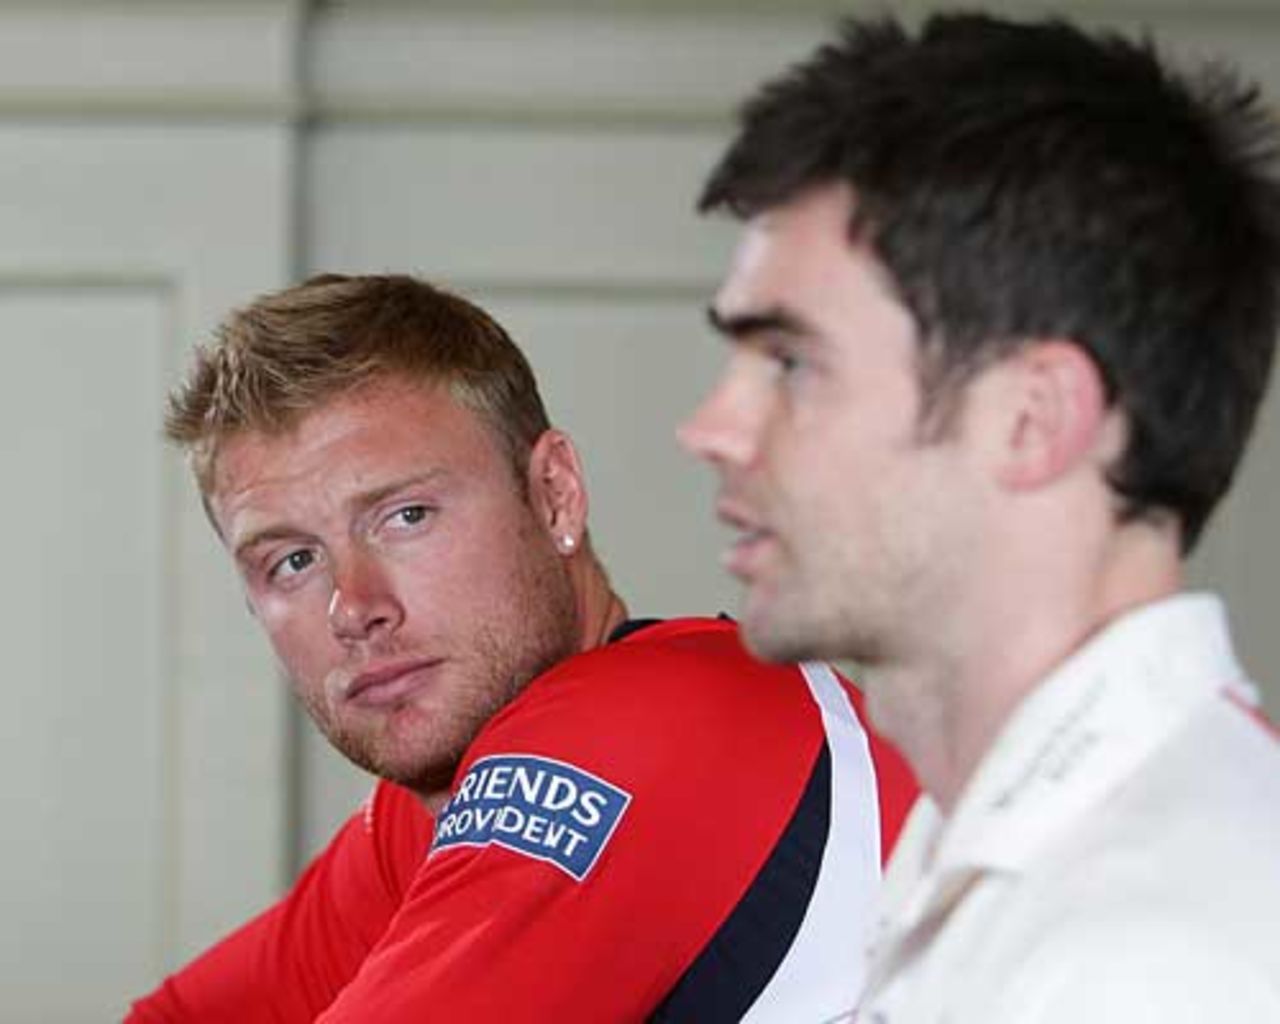 Andrew Flintoff and James Anderson attend a press conference, Old Trafford, April 12, 2010